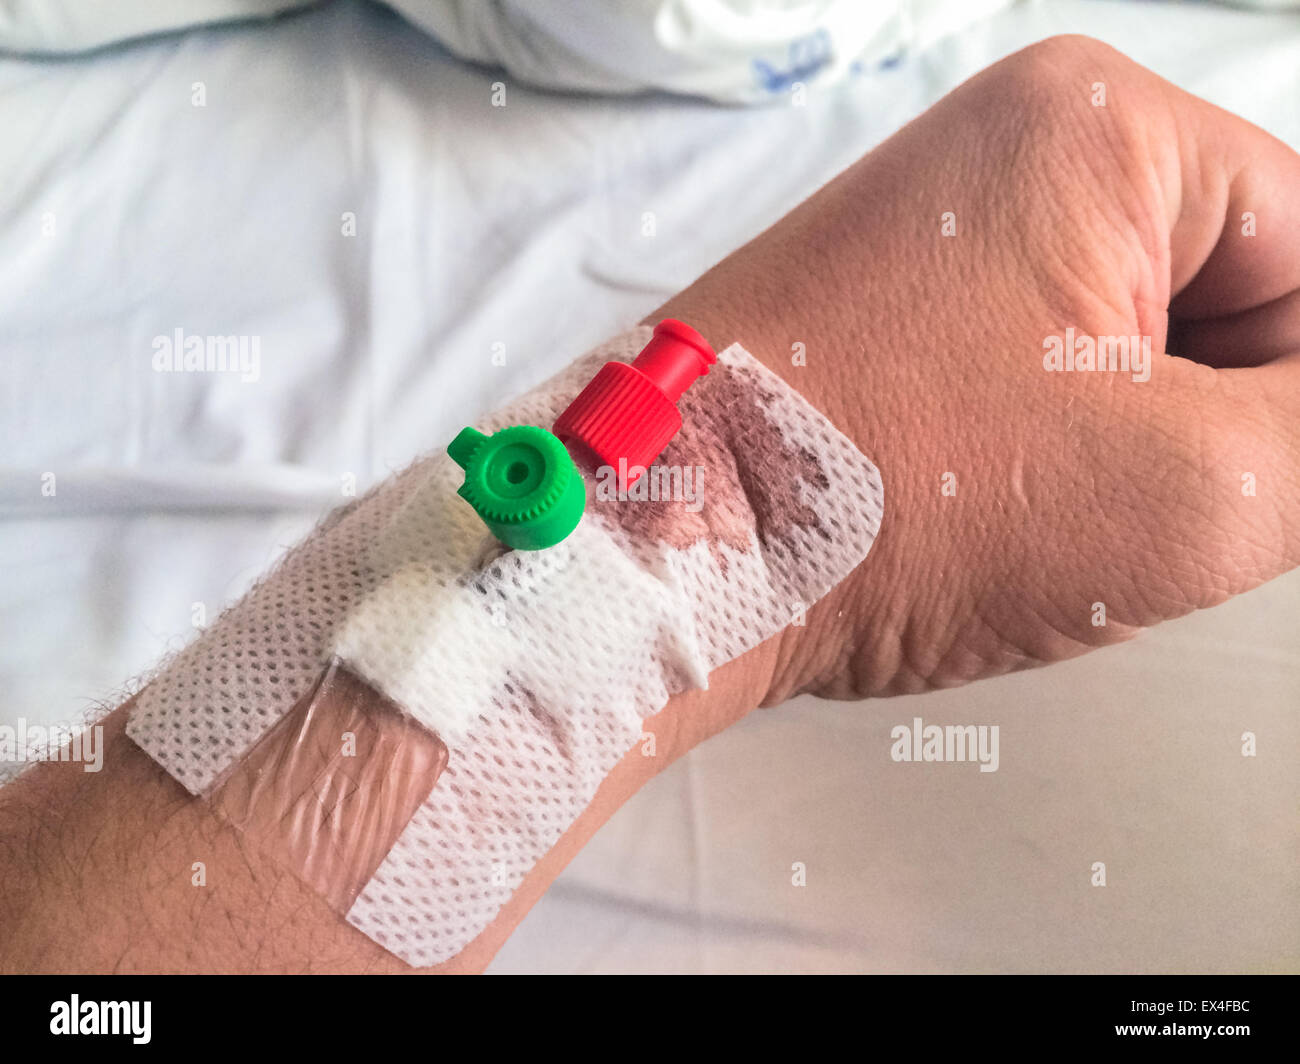 Intravenous cannula, venflon inserted on man's hand with bloodstain. Stock Photo